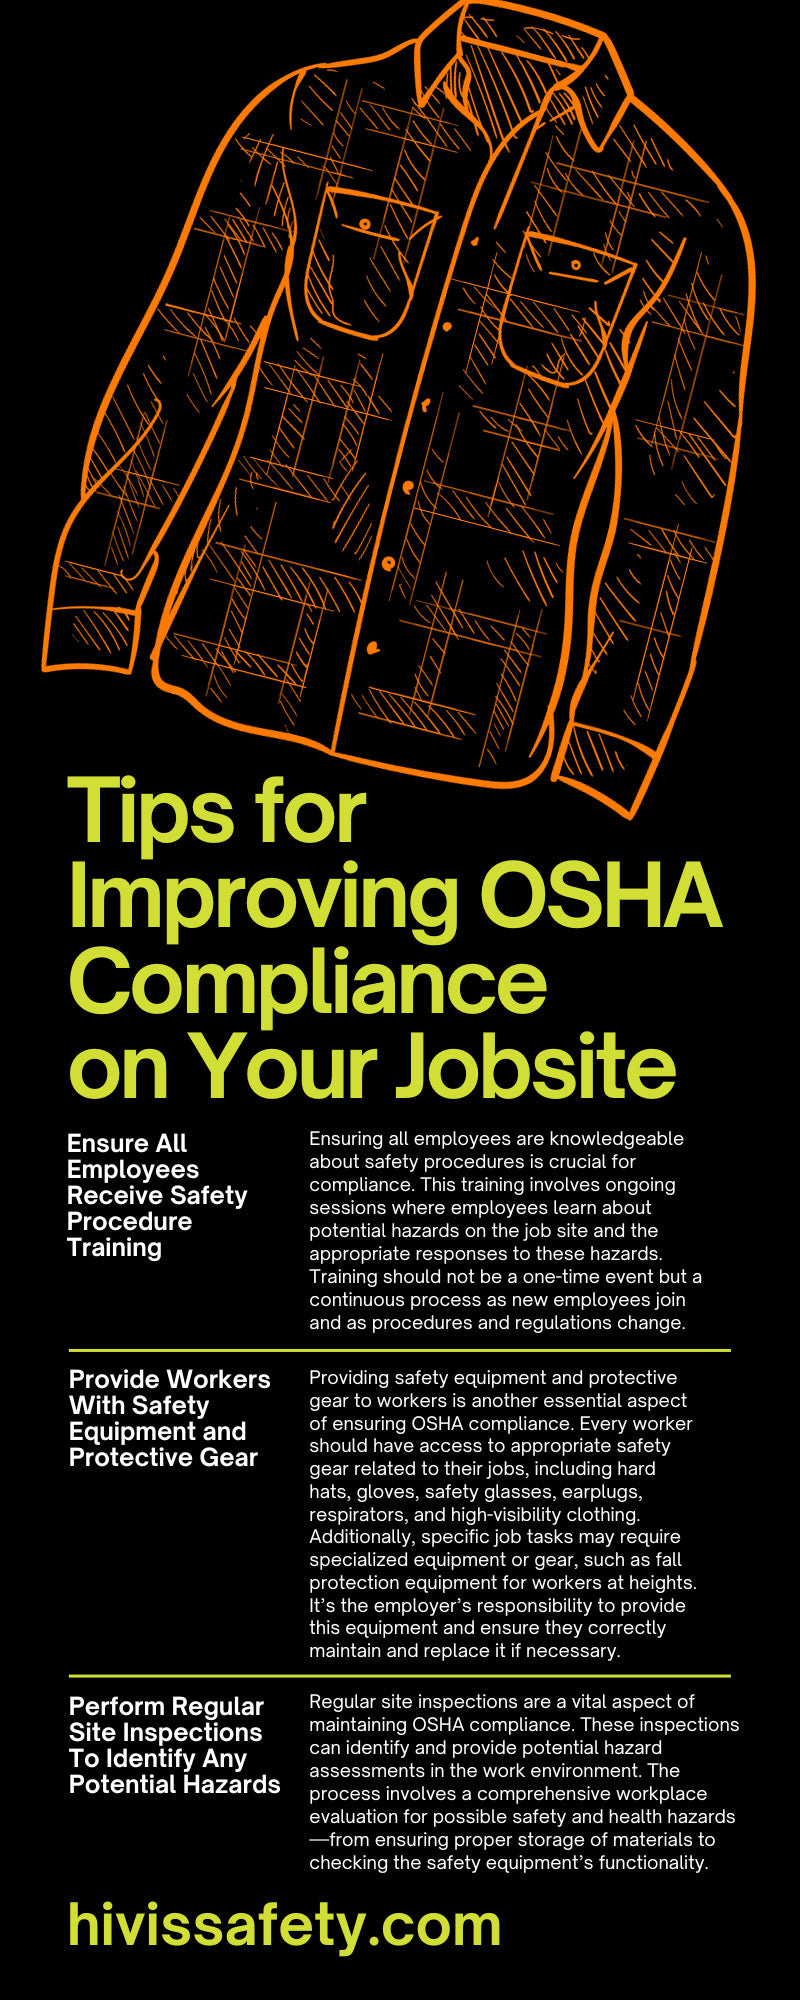 7 Tips for Improving OSHA Compliance on Your Jobsite